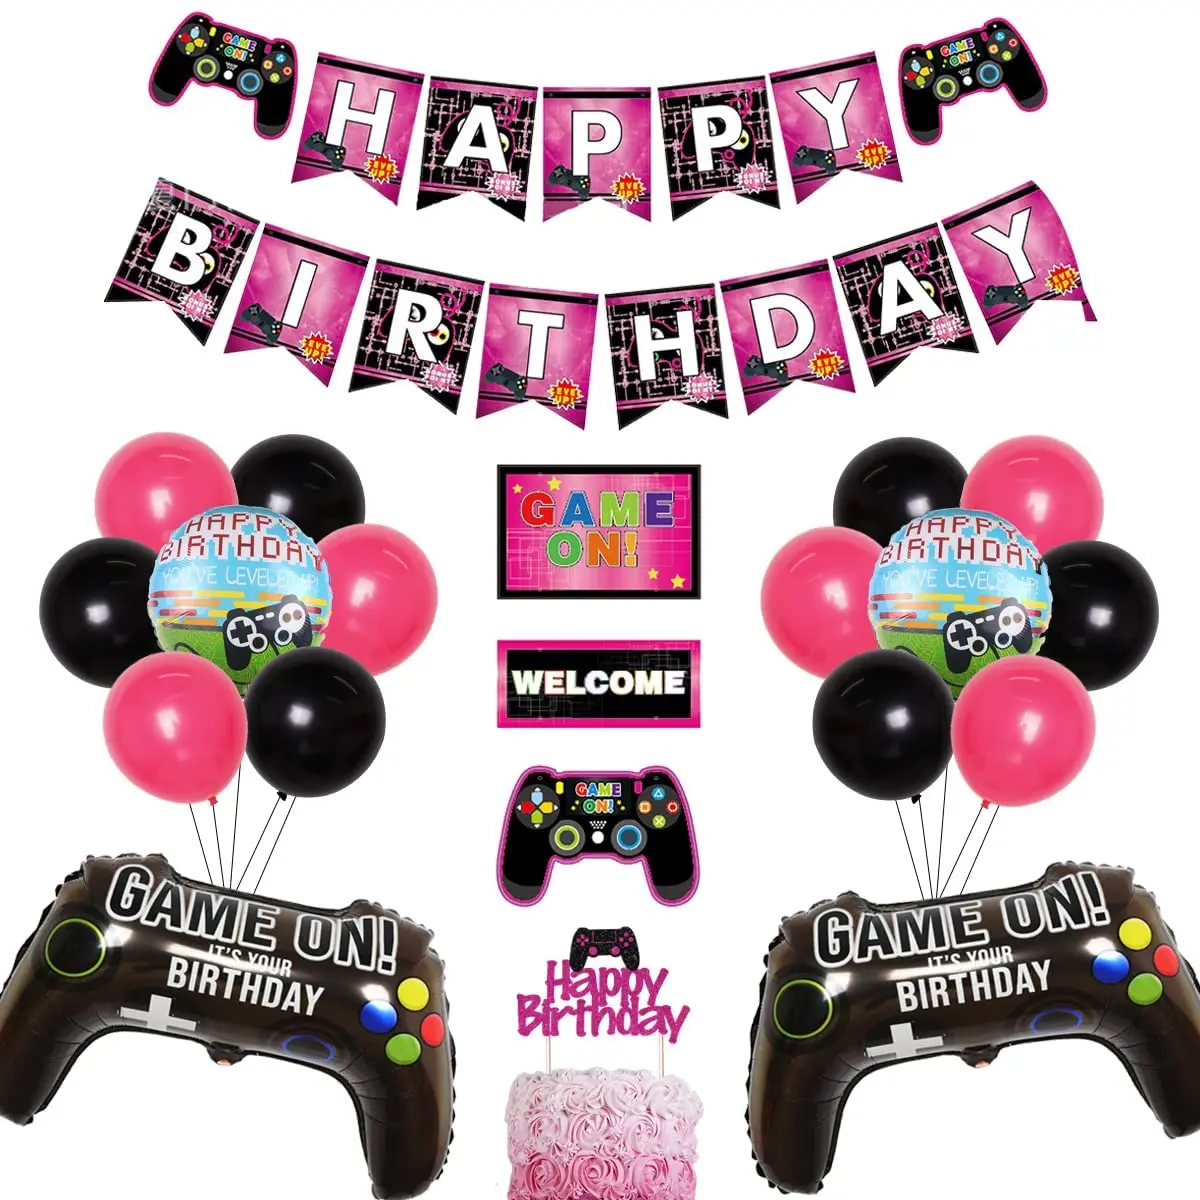 

Video Game Birthday Party Decorations Happy Birthday Banner Cake Topper Controller GamePad Balloons for Girls Birthday Supplies